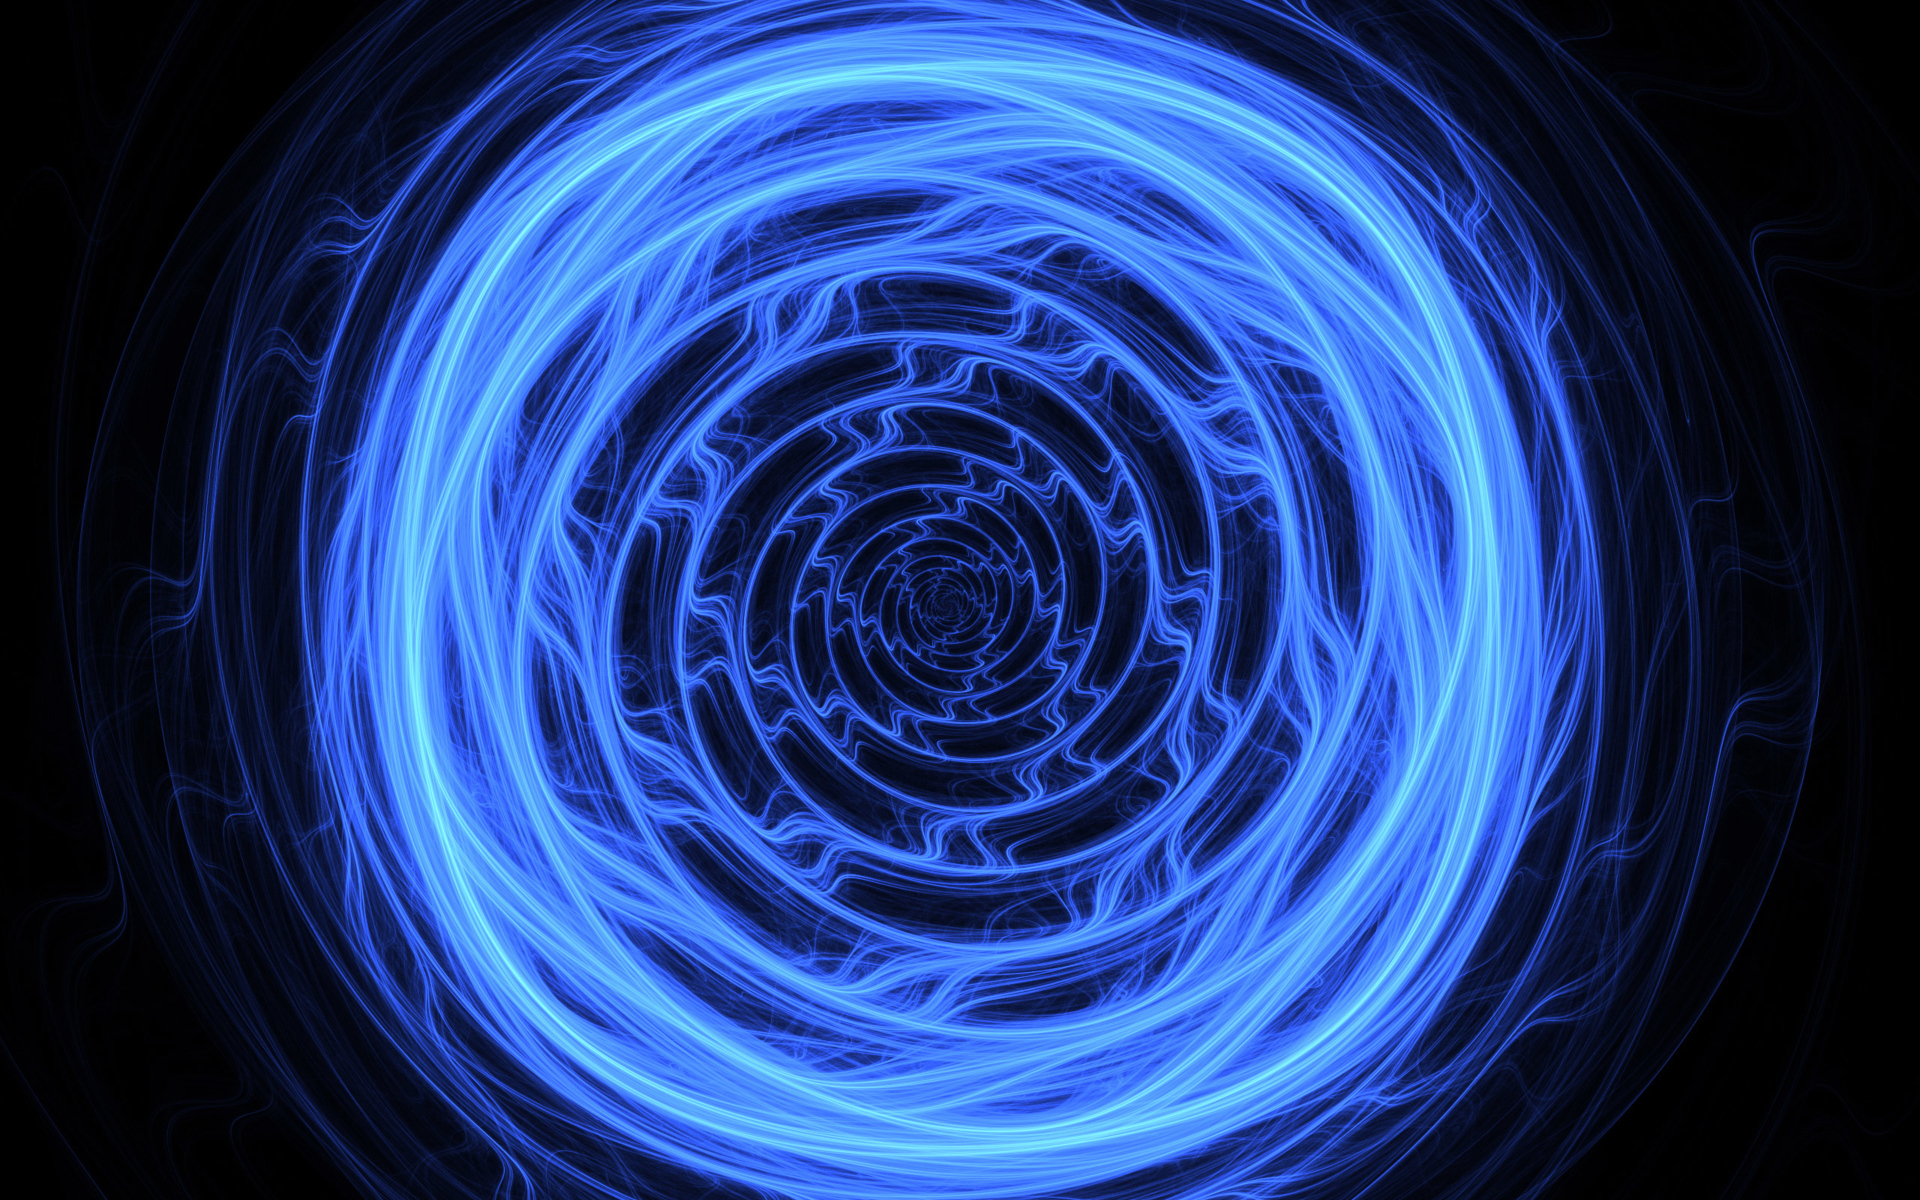 Blue abstract spiral on a black background